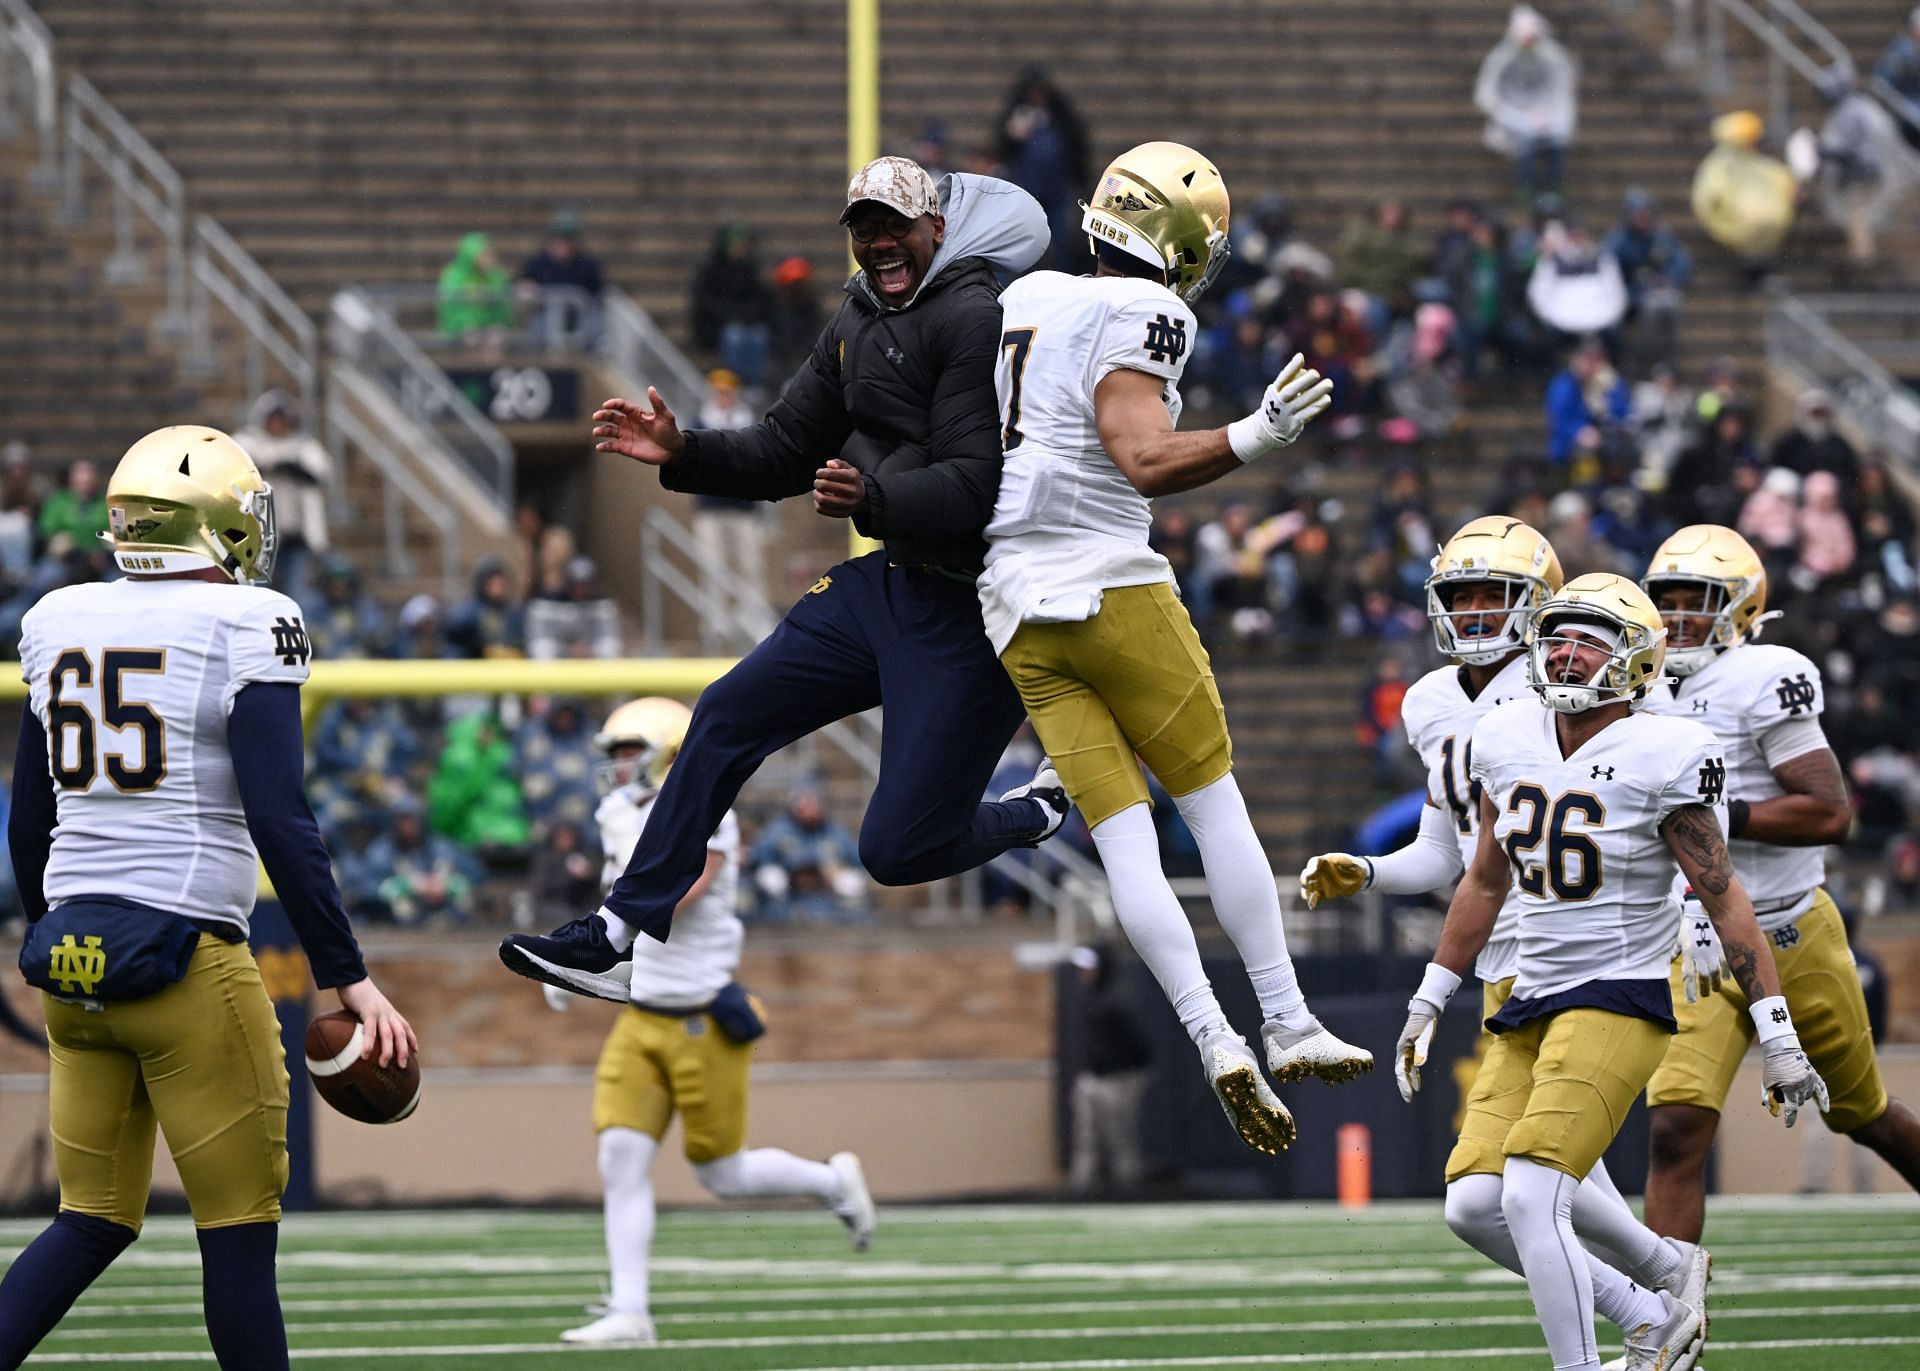 Notre Dame Football: Post-spring 2022 game-by-game predictions